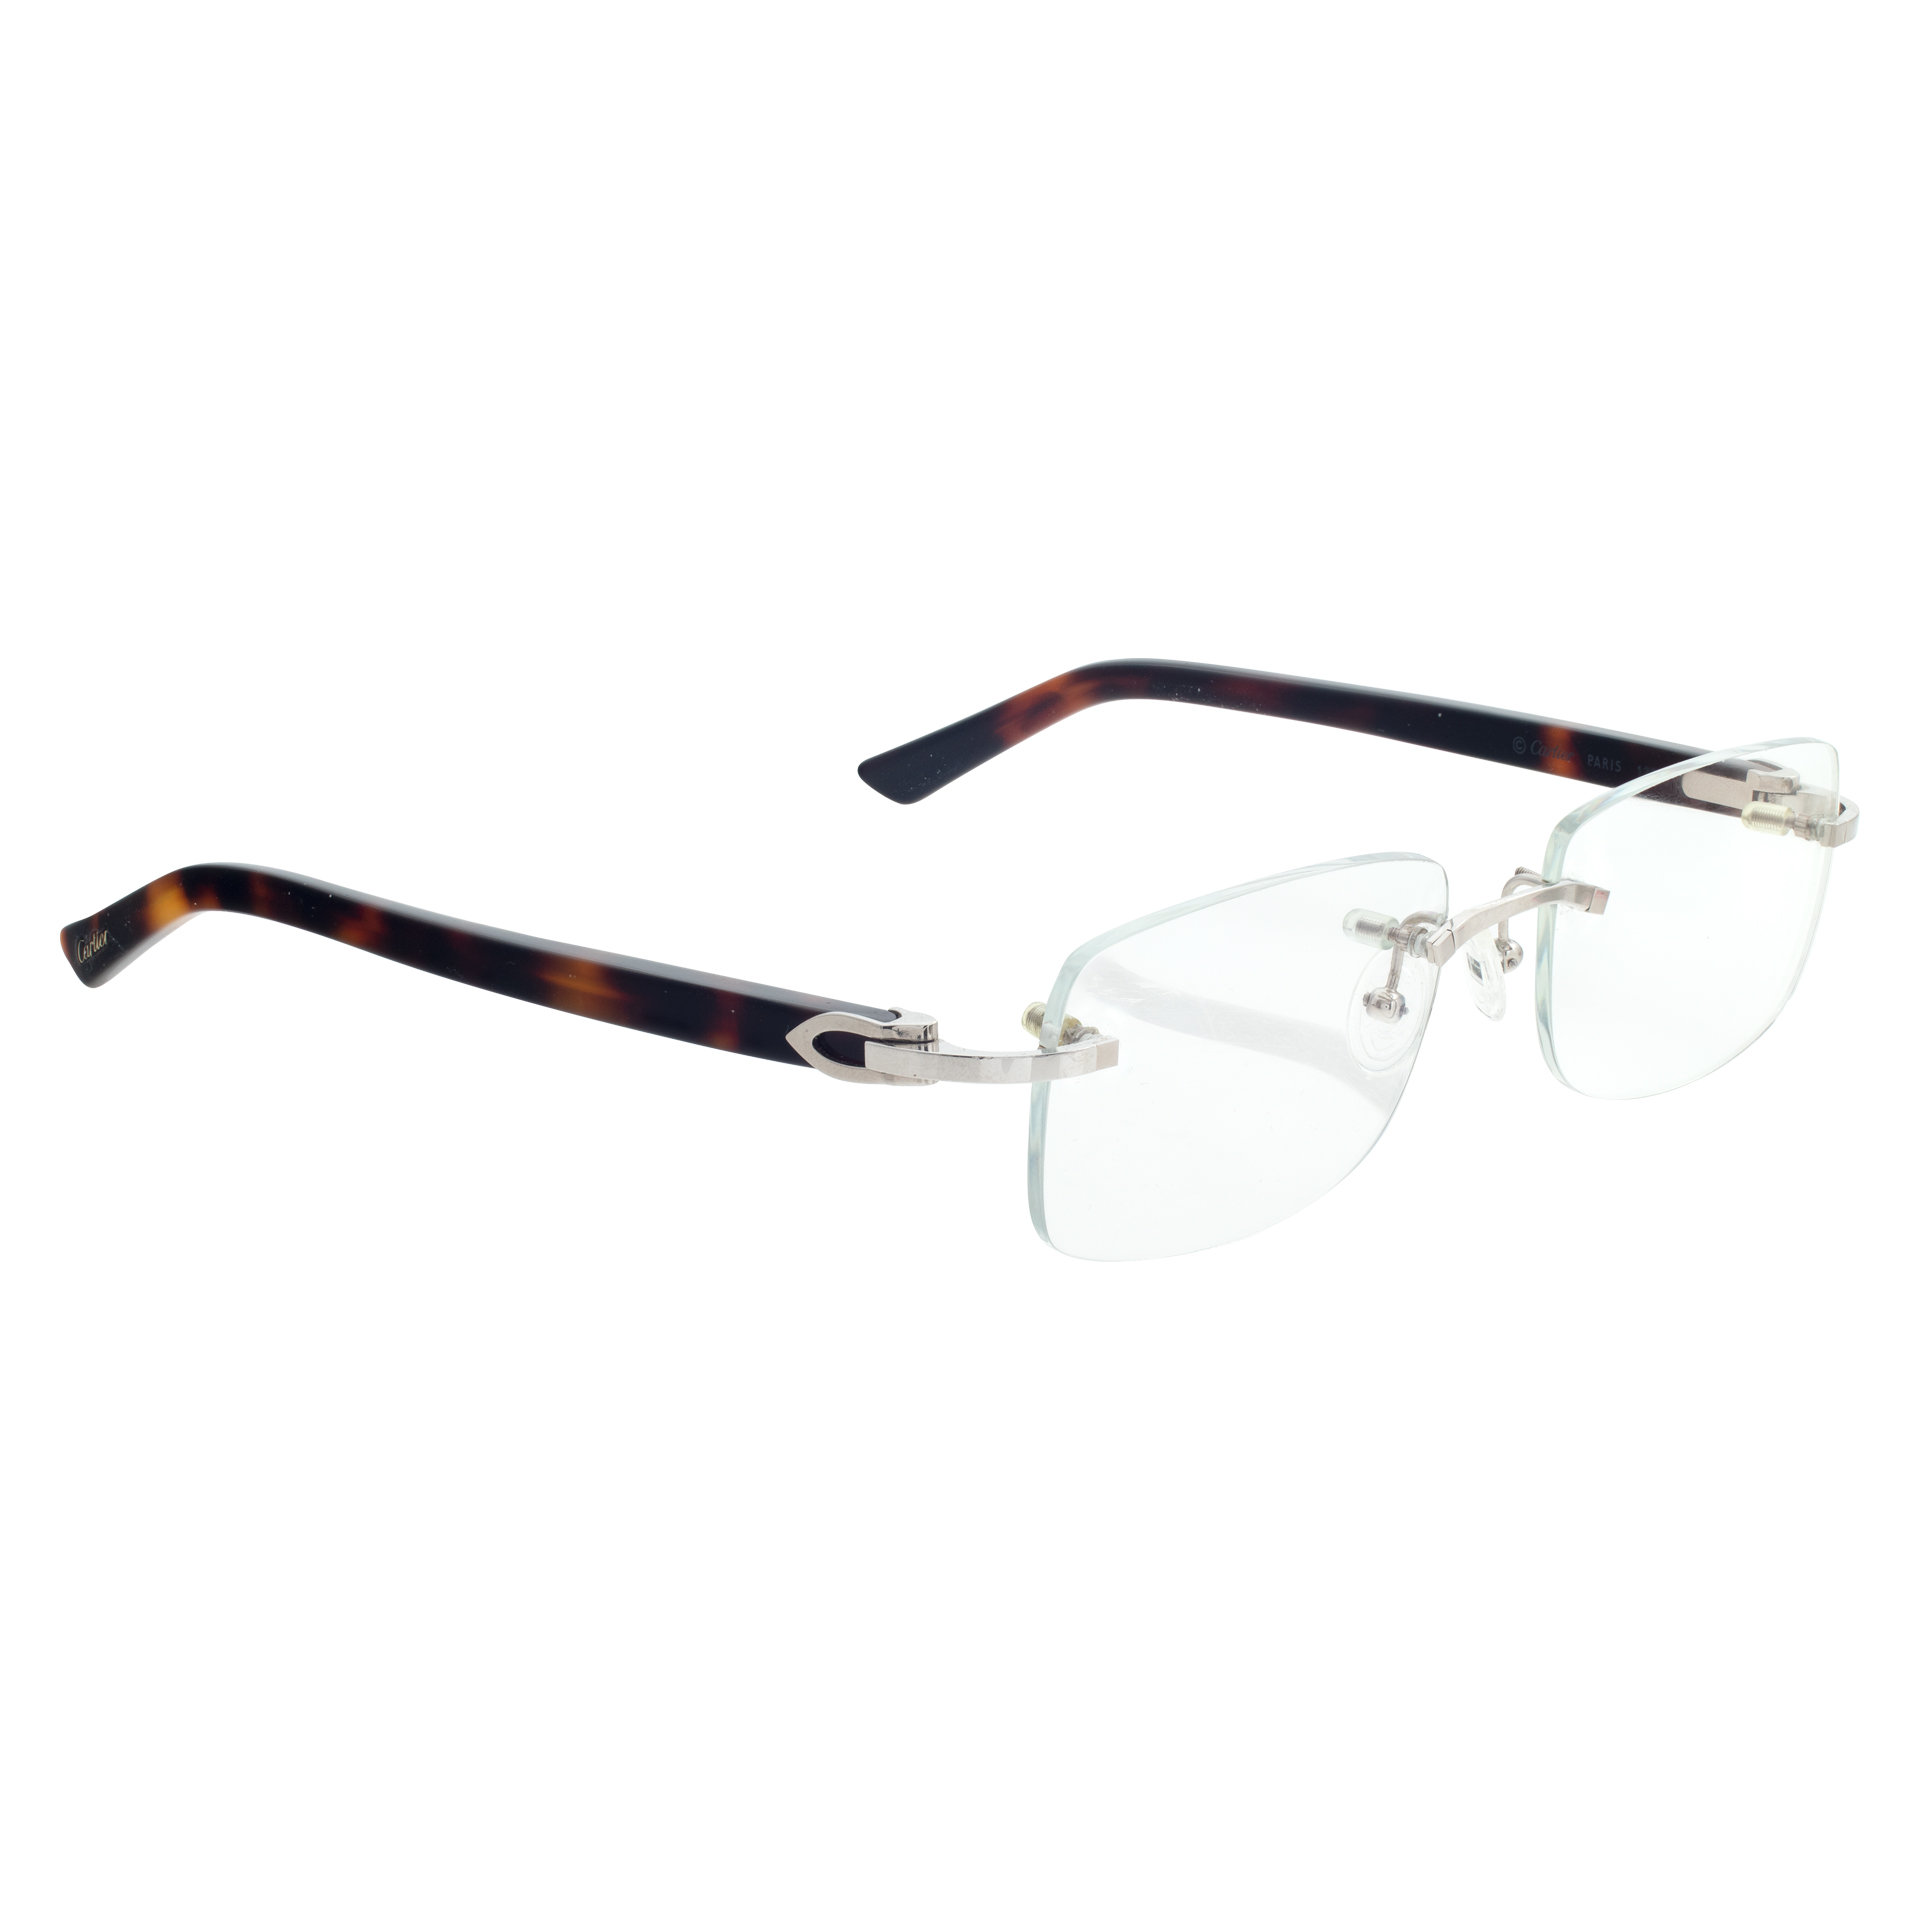 Cartier rimless eyeglasses with tortoise shell temples image 3